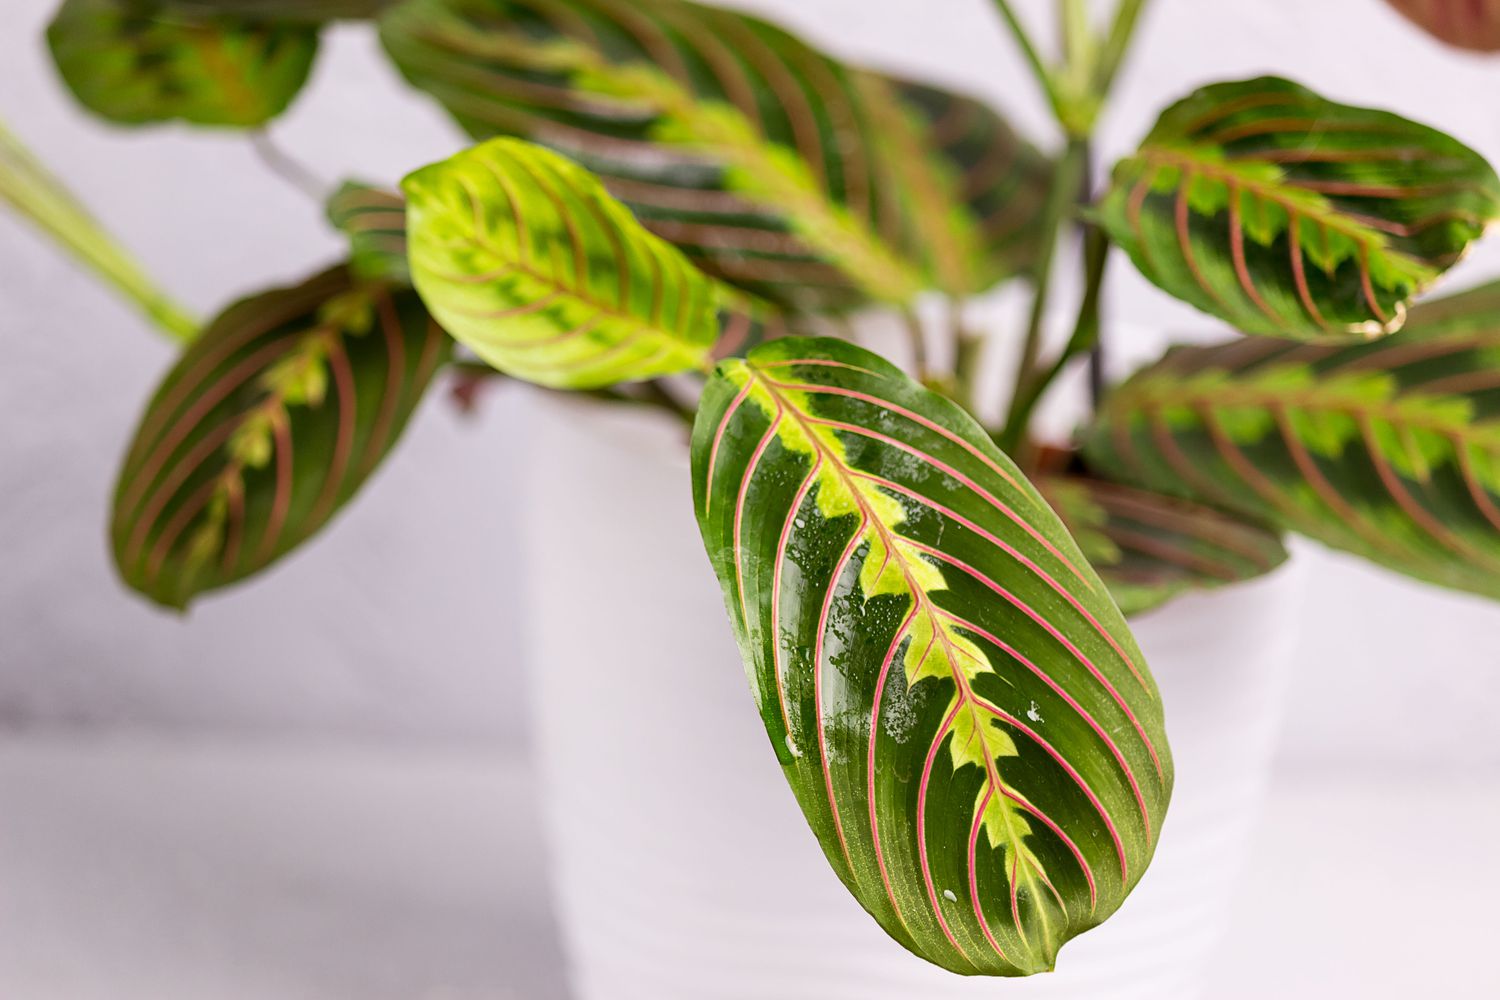 Discover The Surprising Reason Behind Your Prayer Plant Leaves Curling